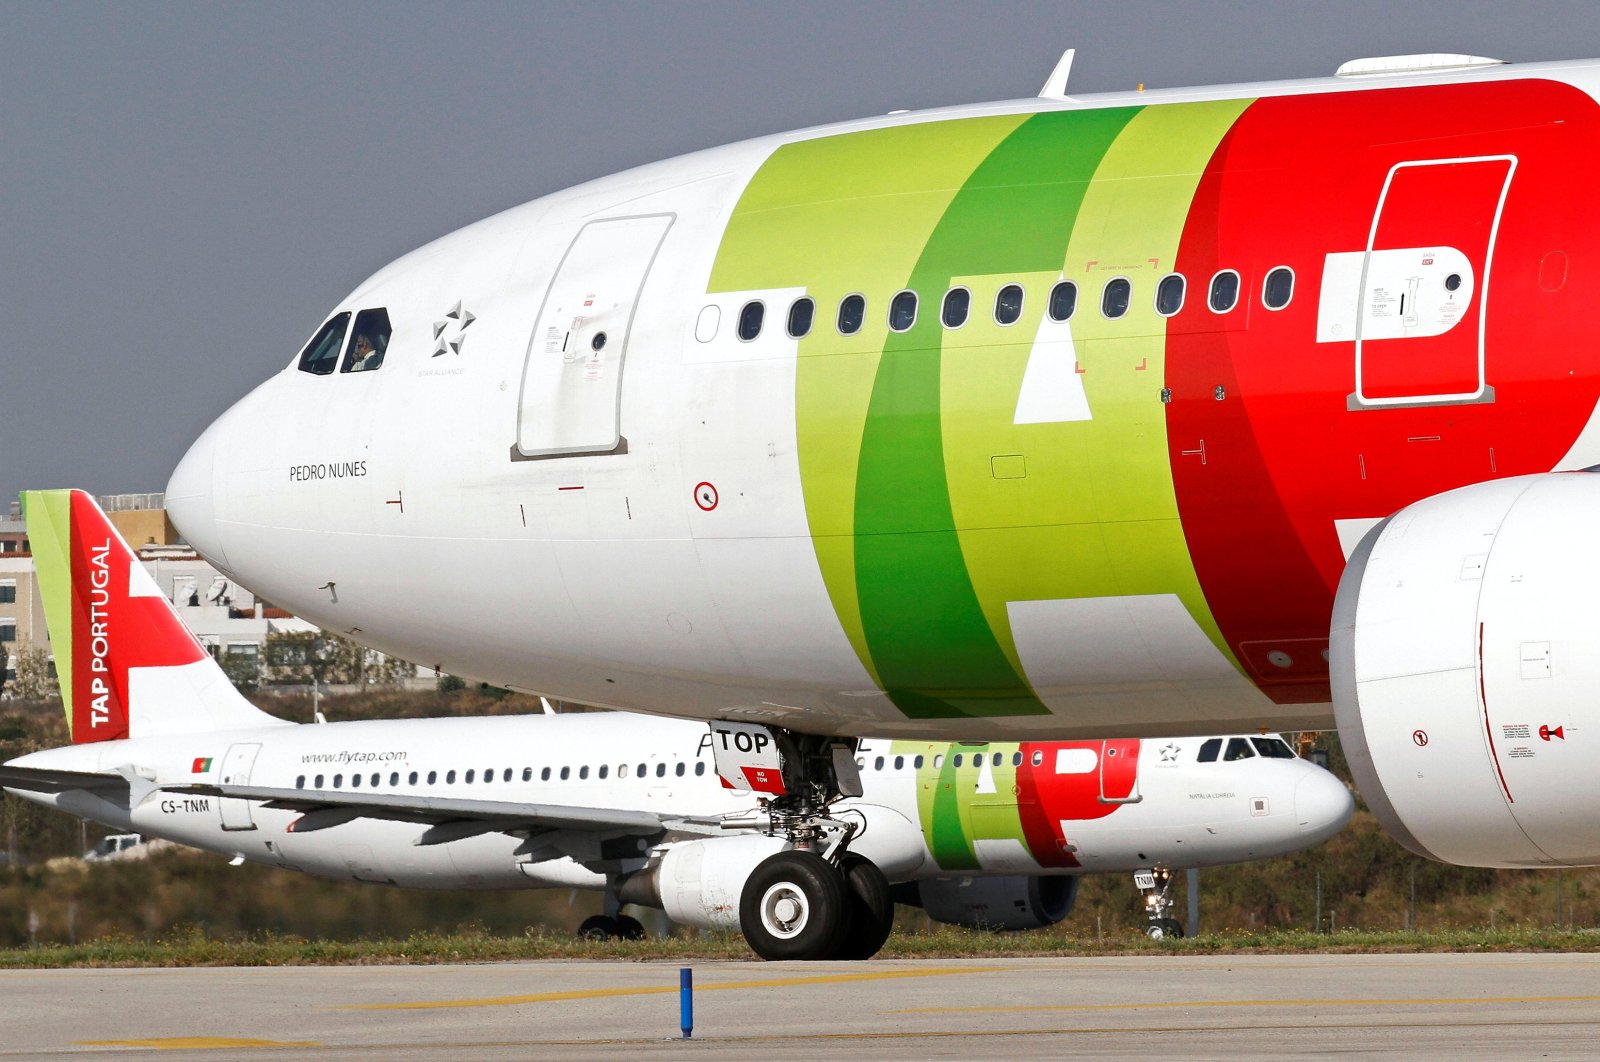 A TAP Air Portugal Airbus 320 aircraft maneuvers behind another TAP Airbus 330 at Lisbon airport, Portugal, March 29, 2012. (Reuters Photo)